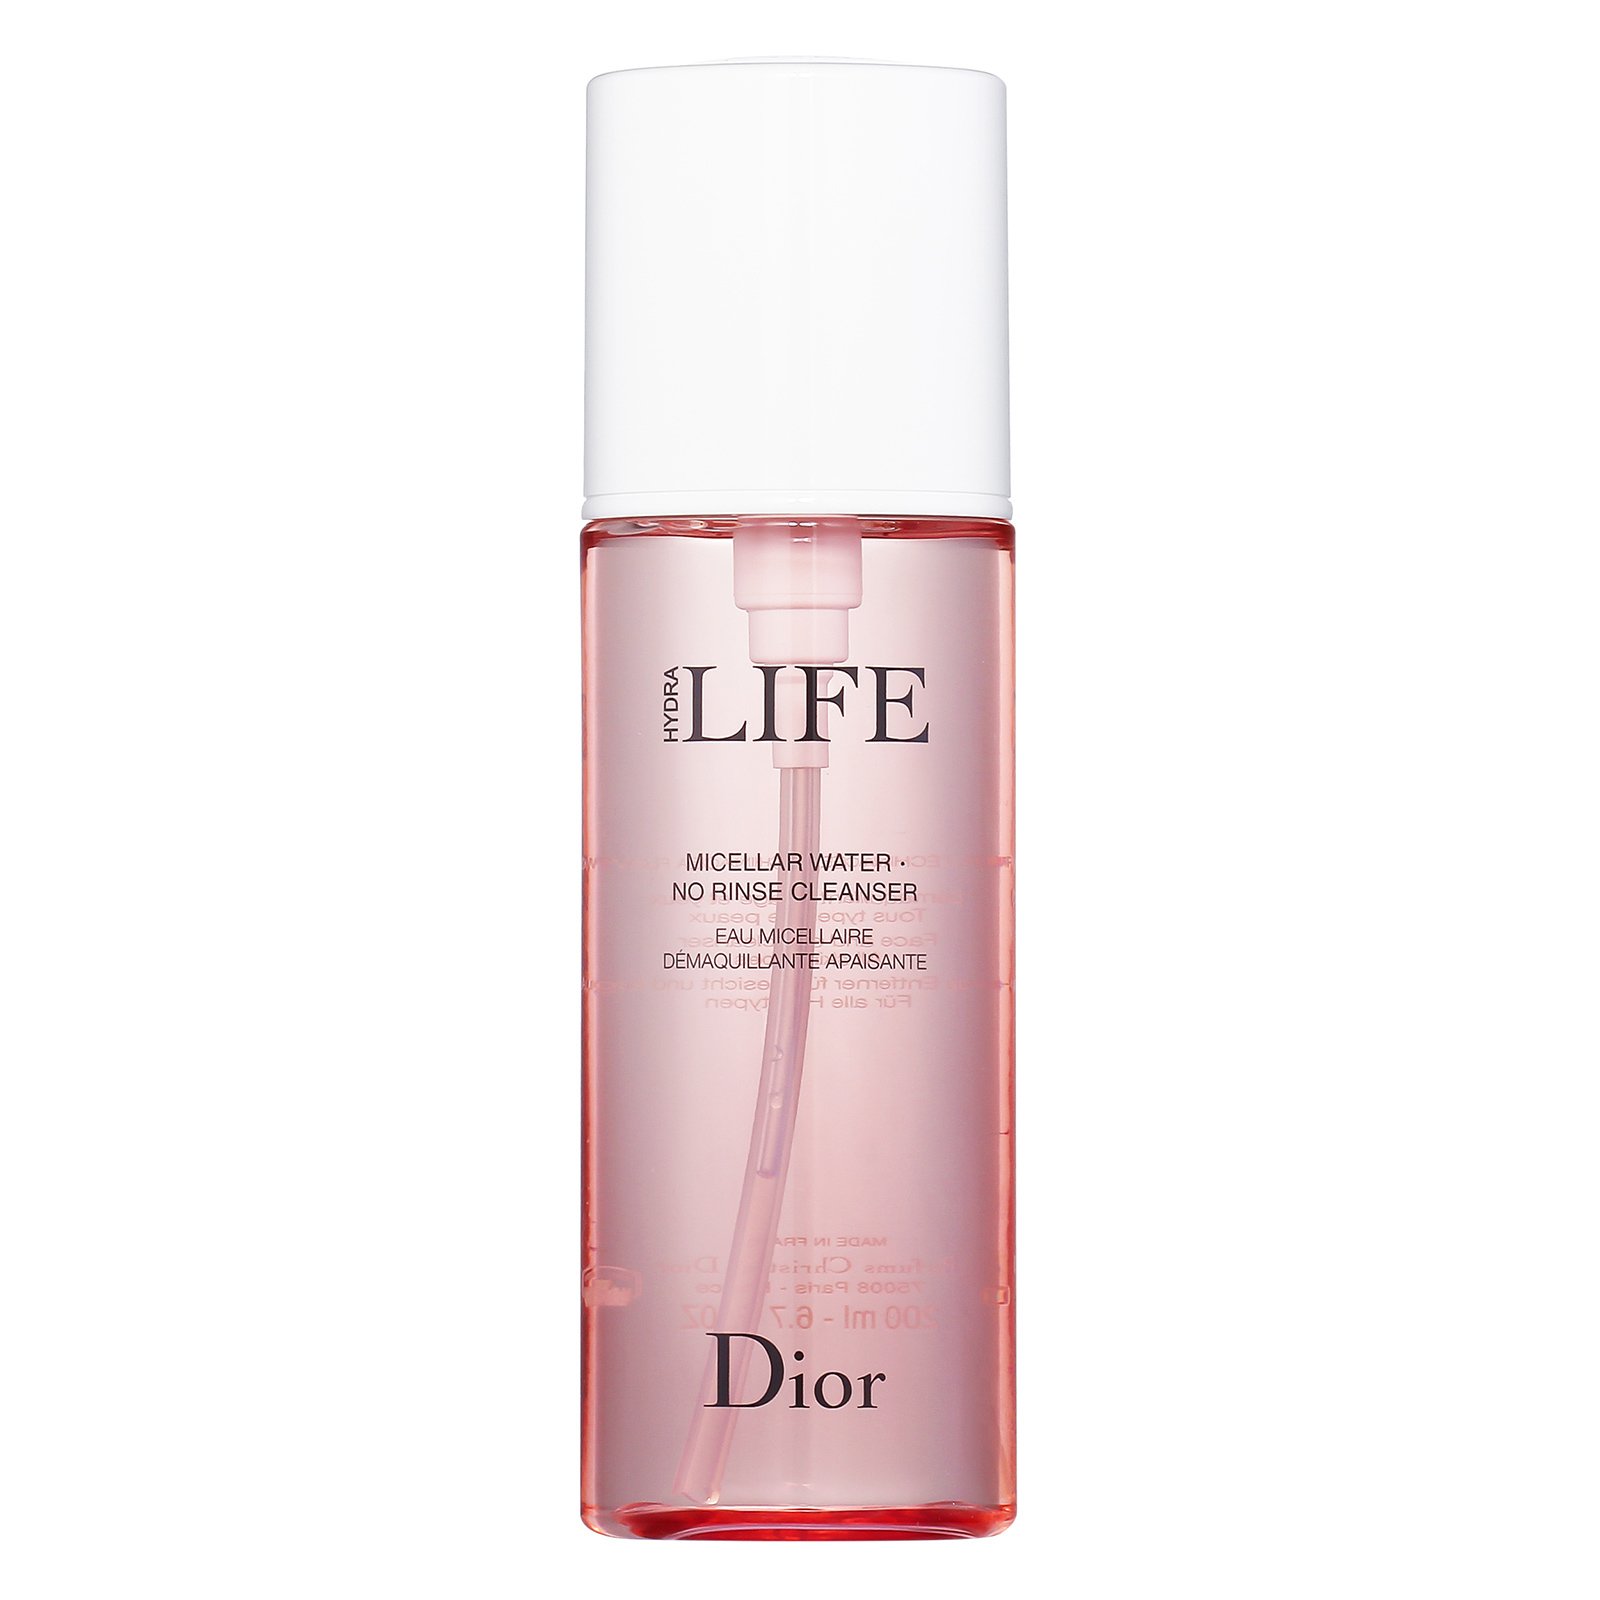 Hydra Life Micellar Water - No Rinse Cleanser